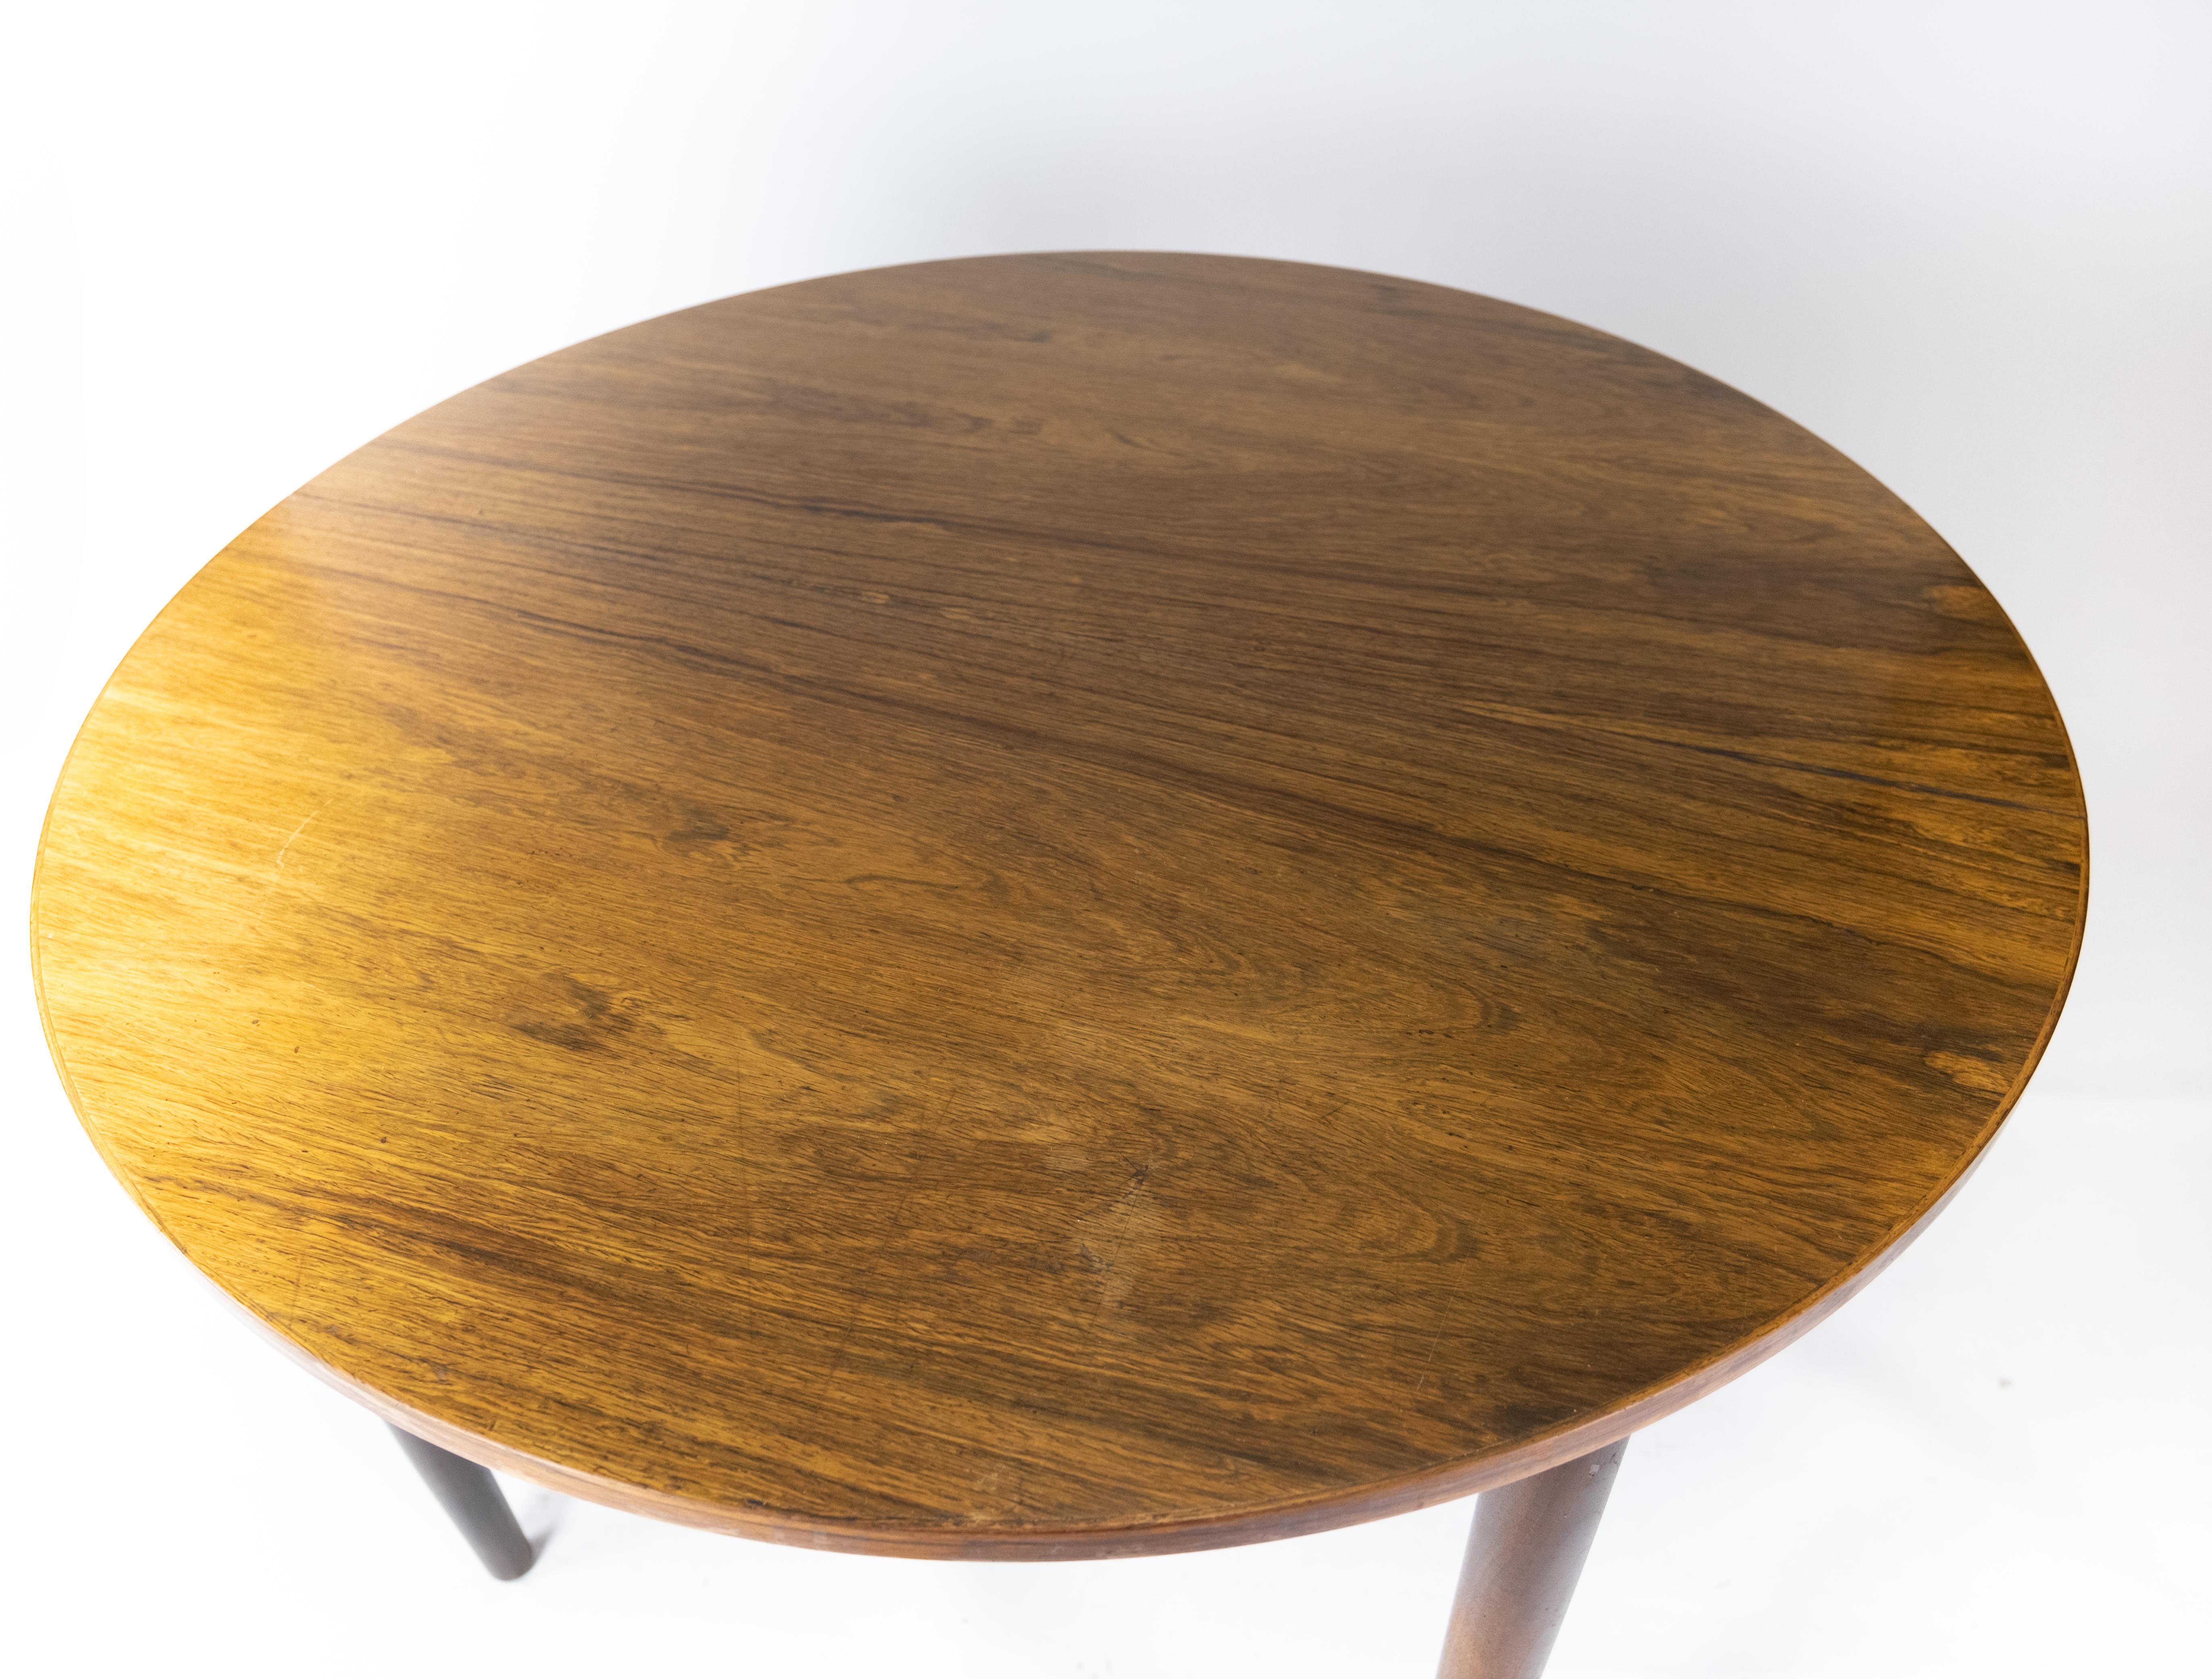 Scandinavian Modern Dining Table in Rosewood of Danish Design from the 1960s For Sale